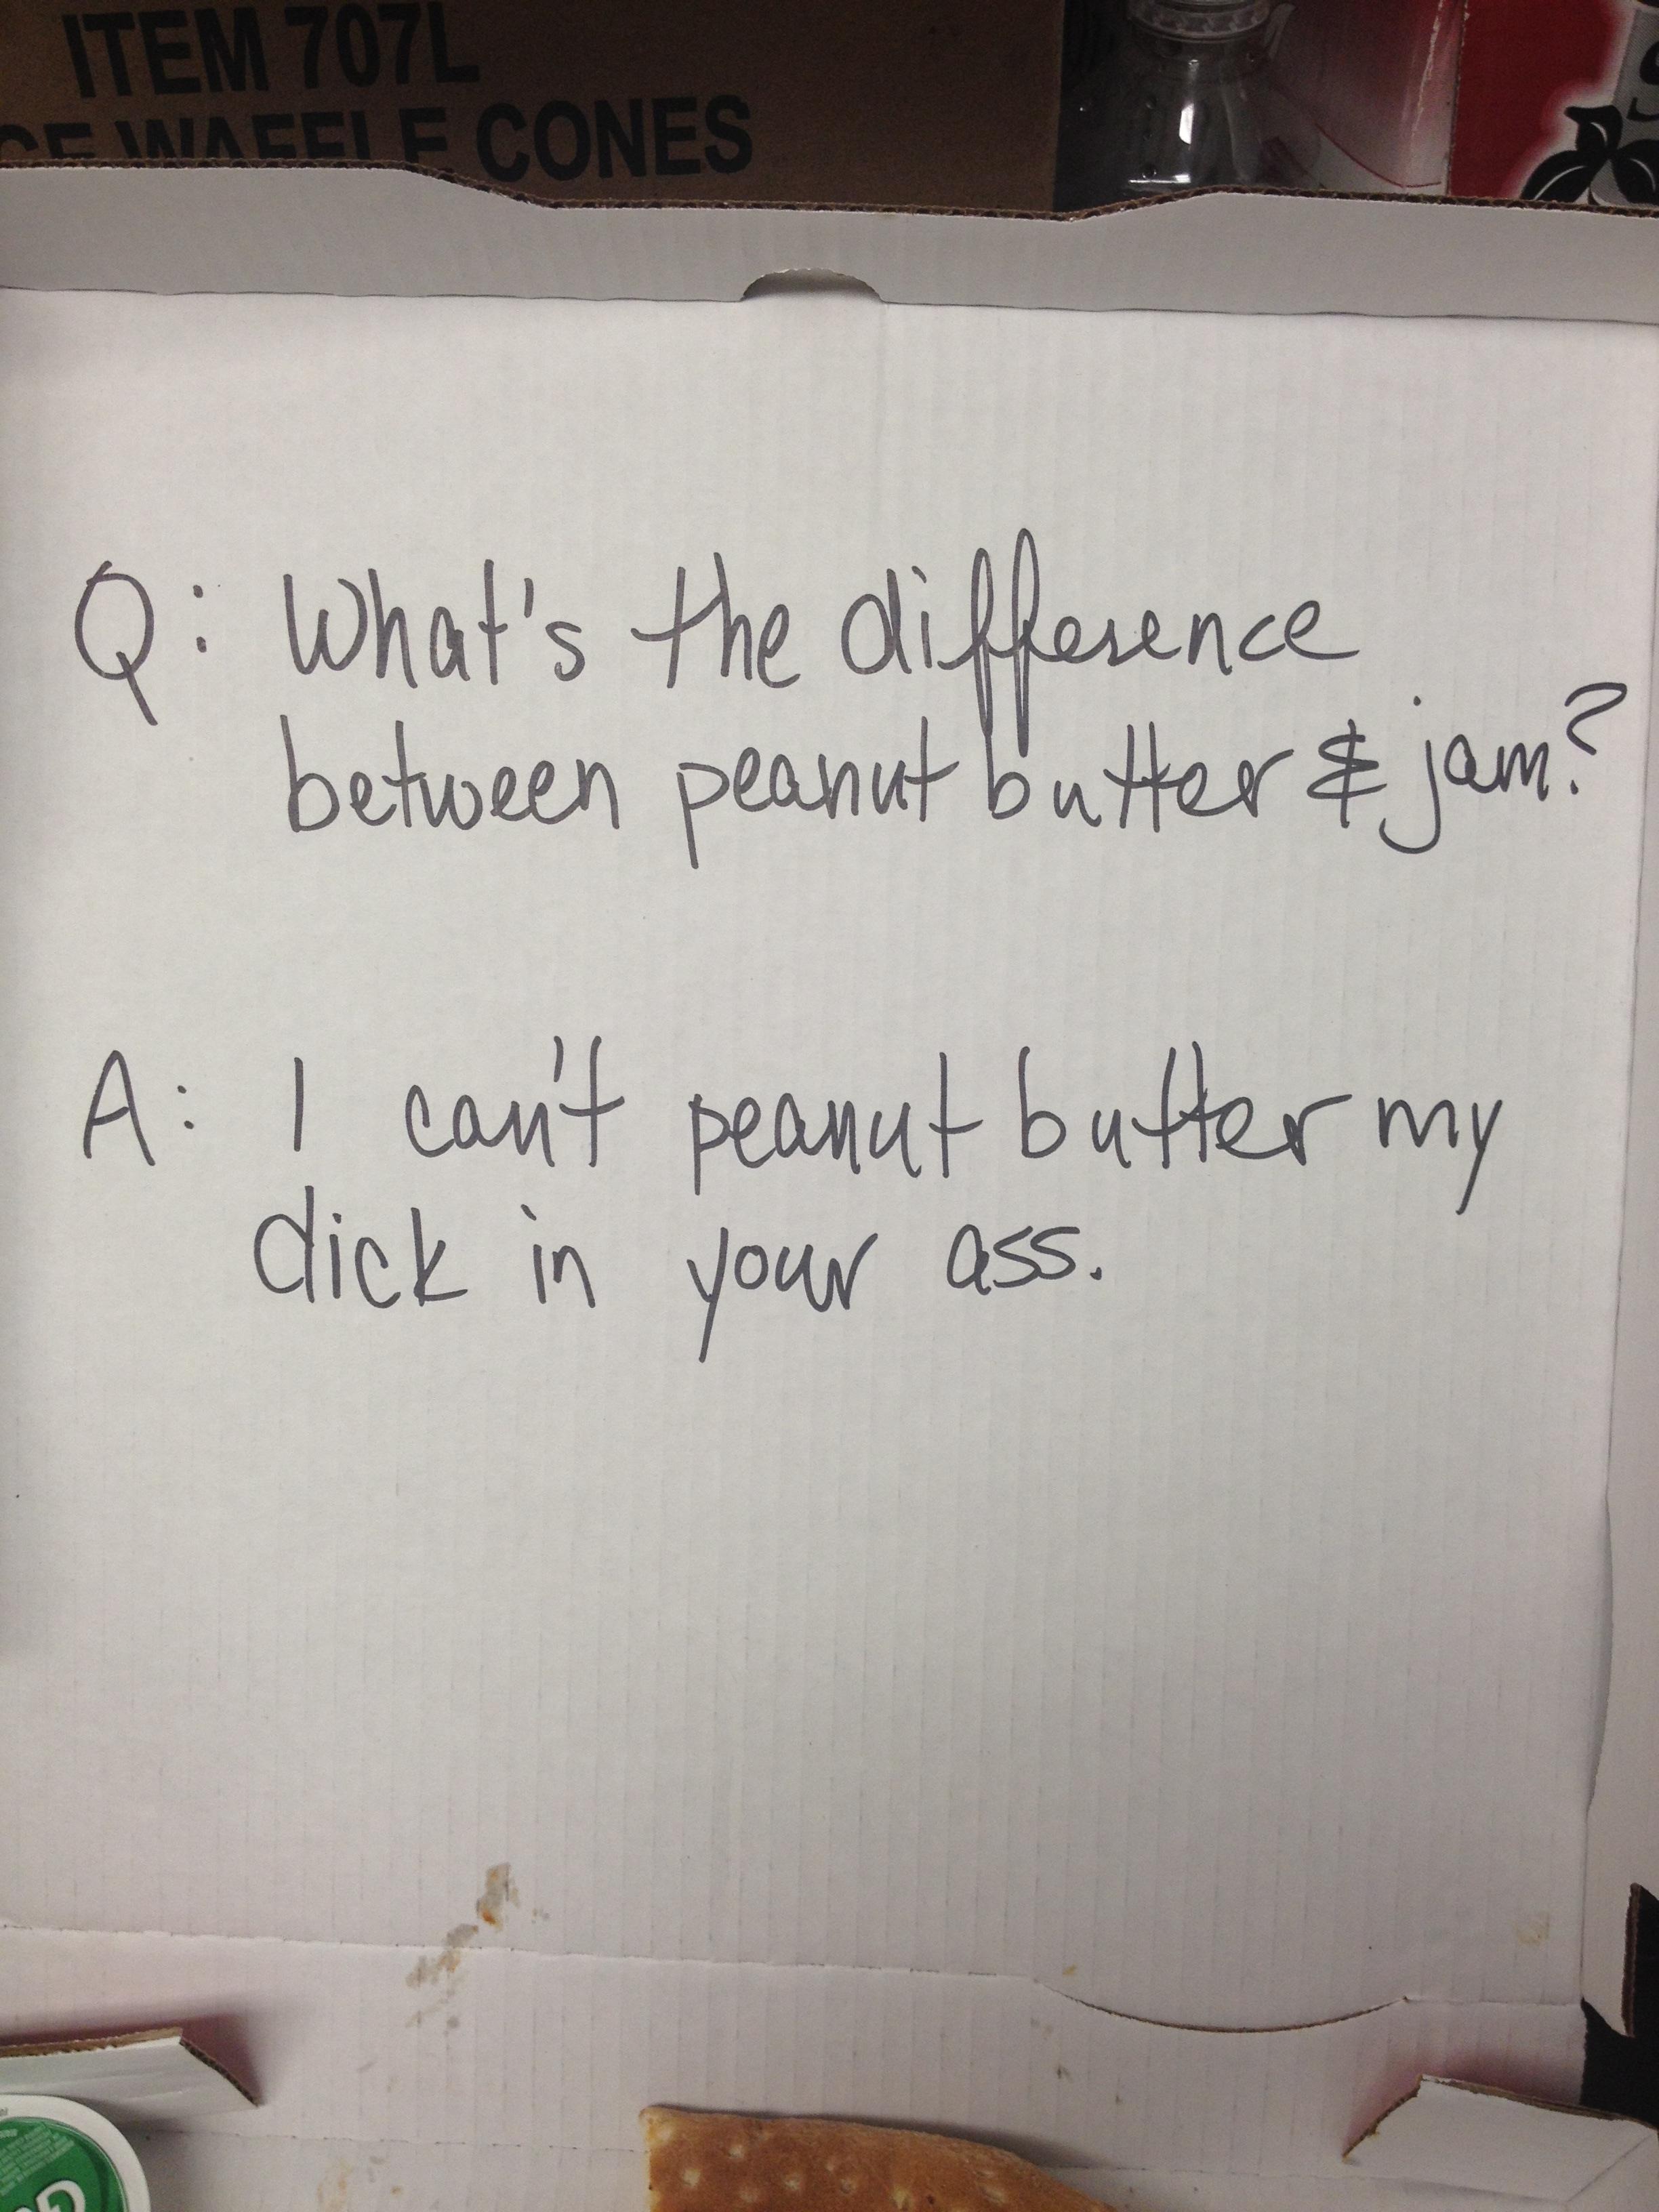 Woodshop reccomend Peanut butter and jelly jokes